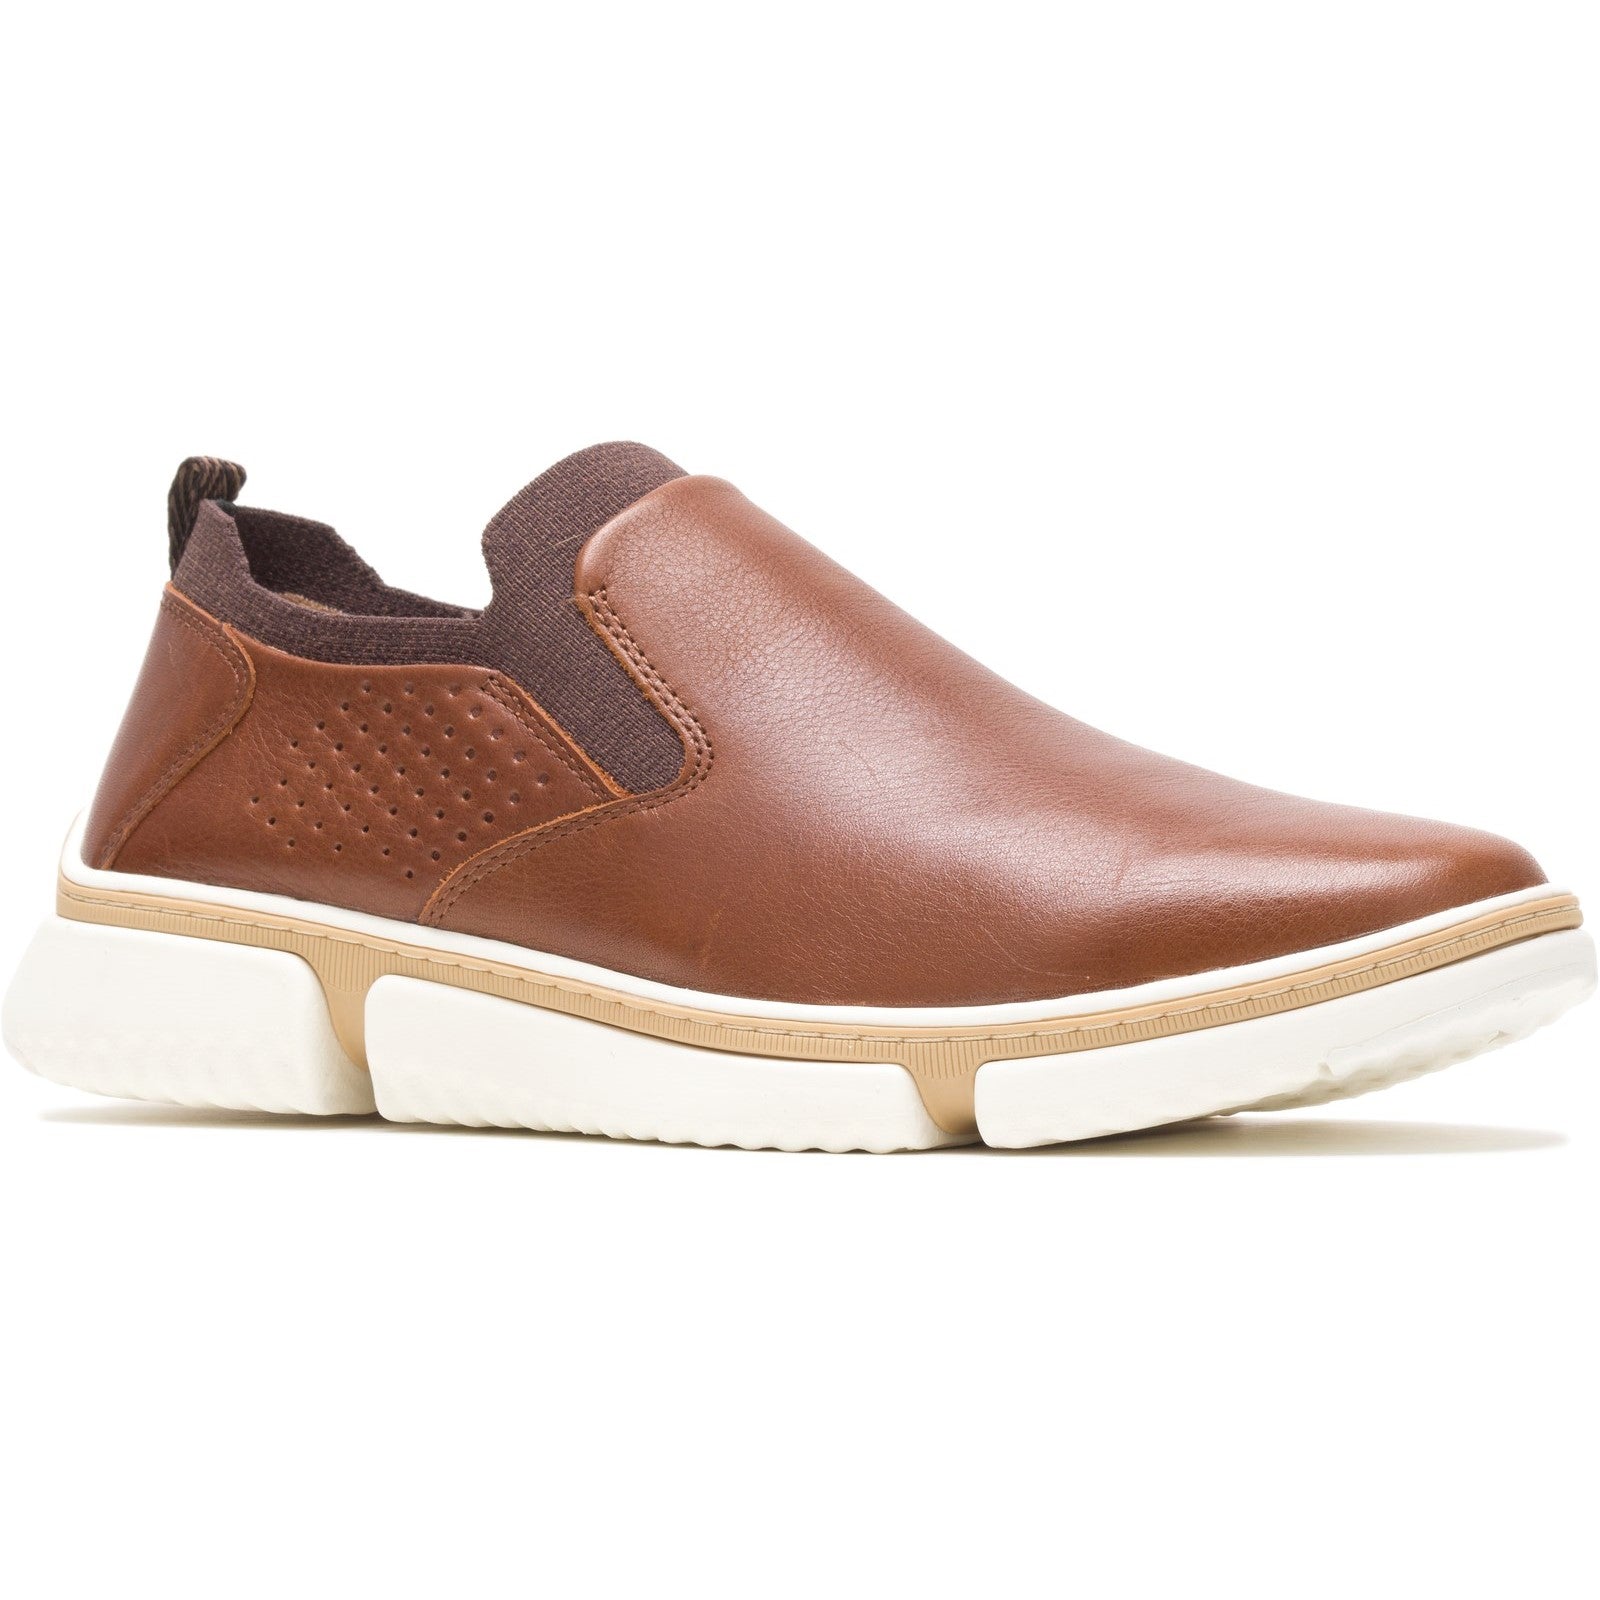 Hush Puppies Mens Bennet Leather Shoe - Brown